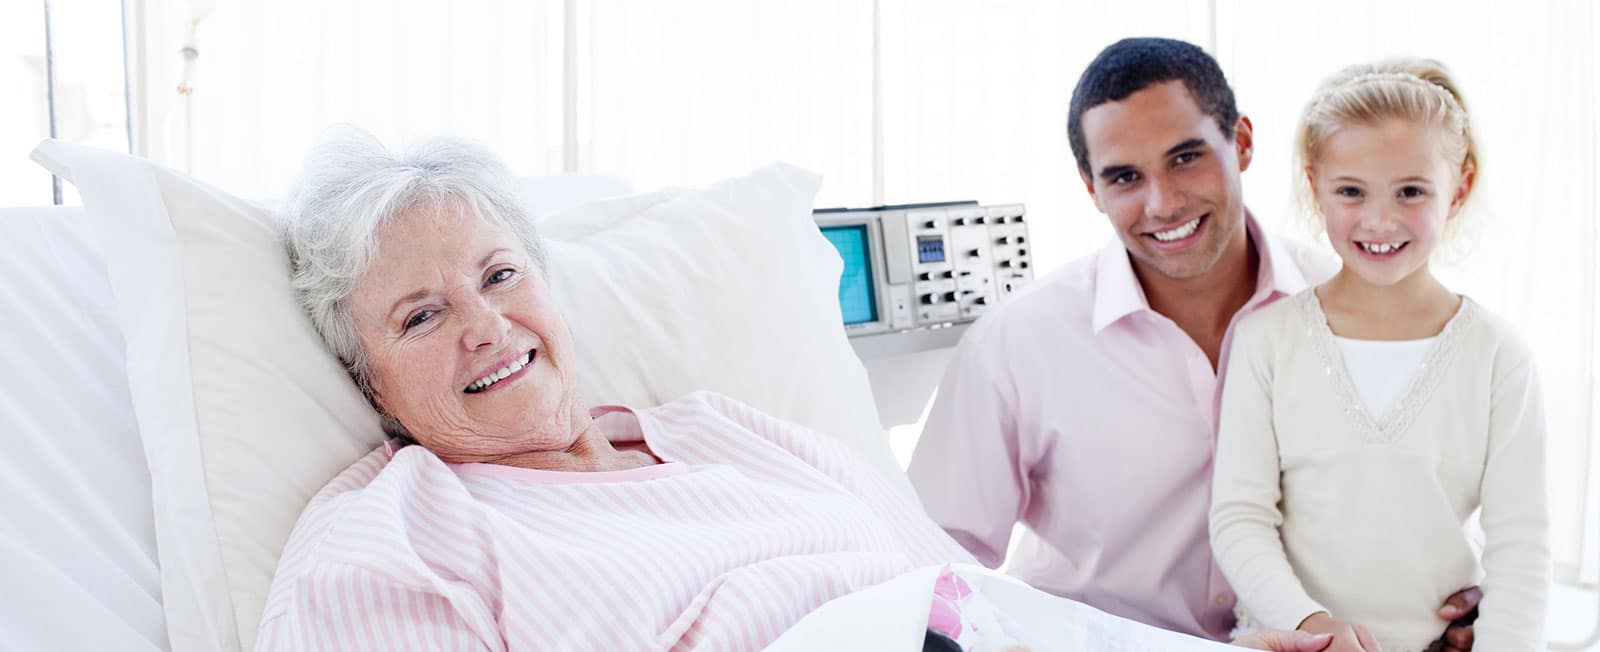 Image of a family smiling in a hospital room on PSA Financial's website